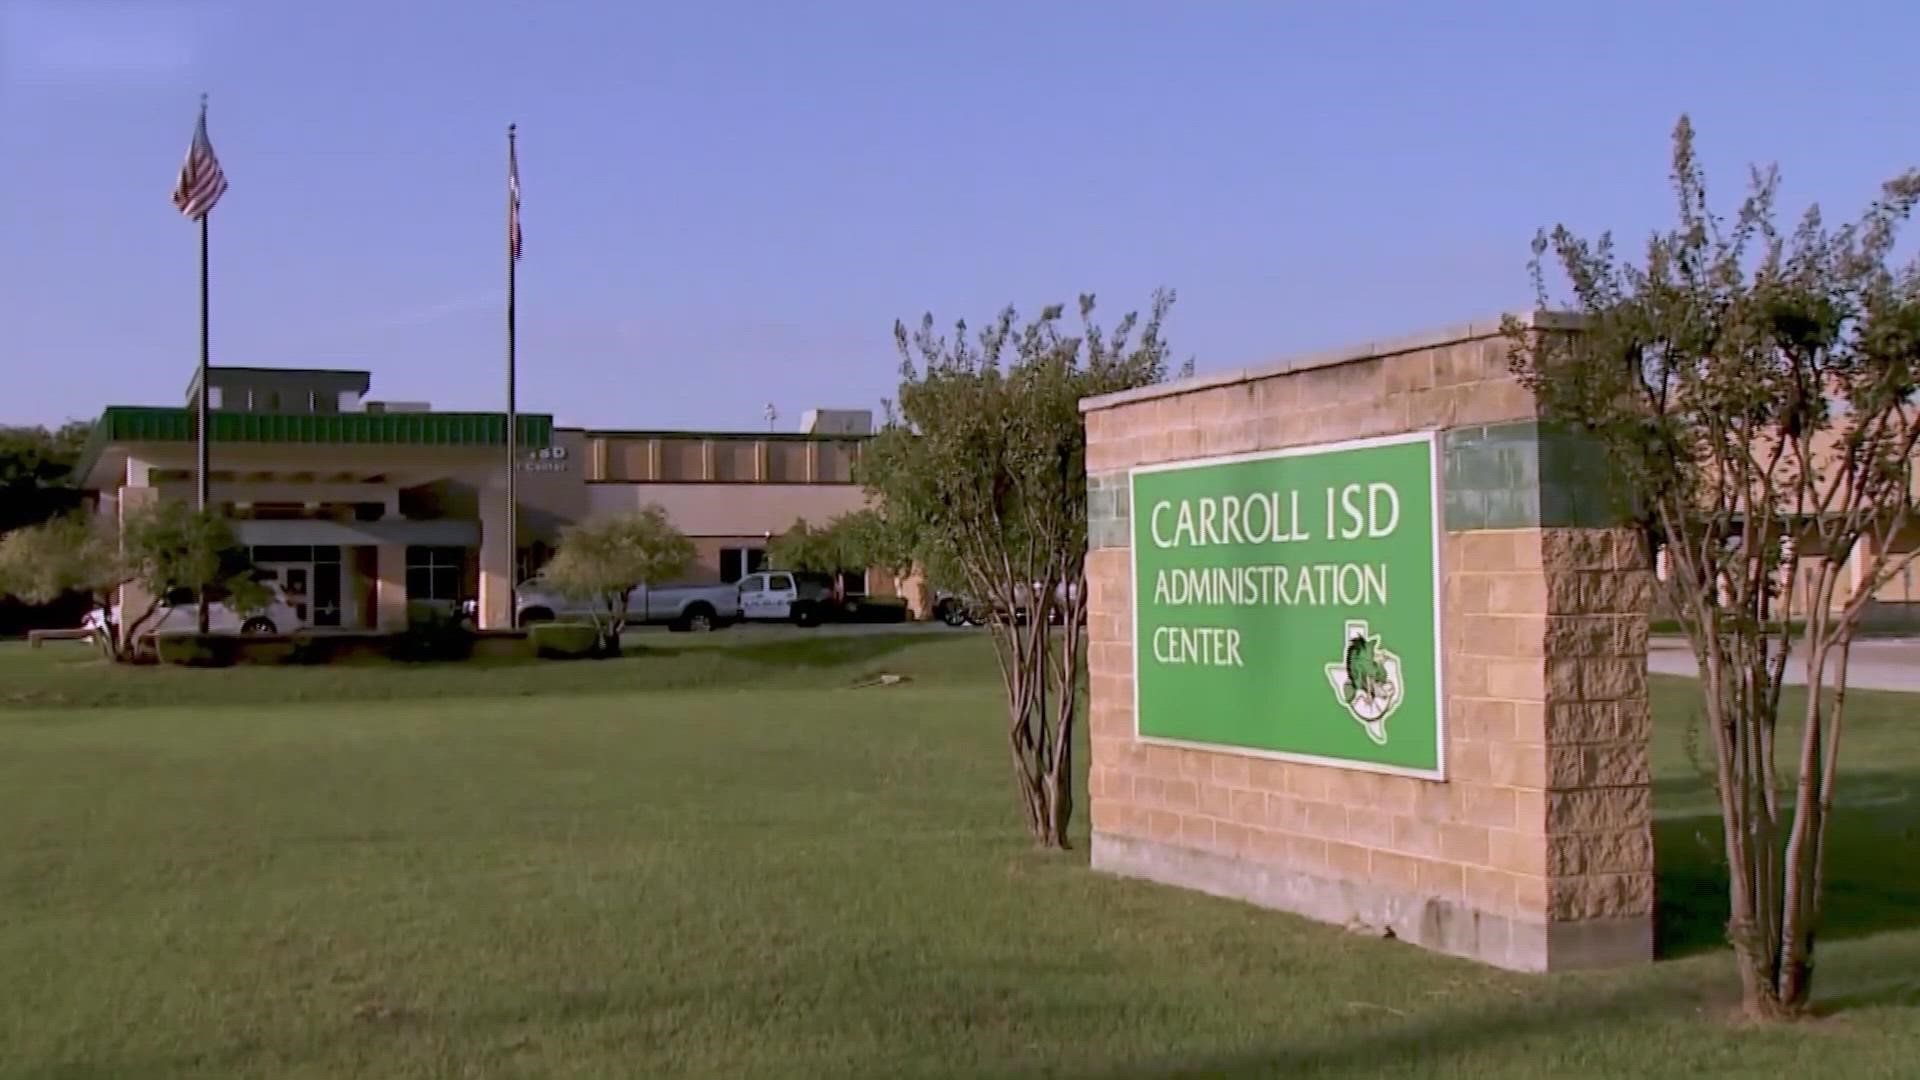 Carroll ISD will vote Monday on whether to hire a Republican-focused consulting firm to oversee the district’s communications.